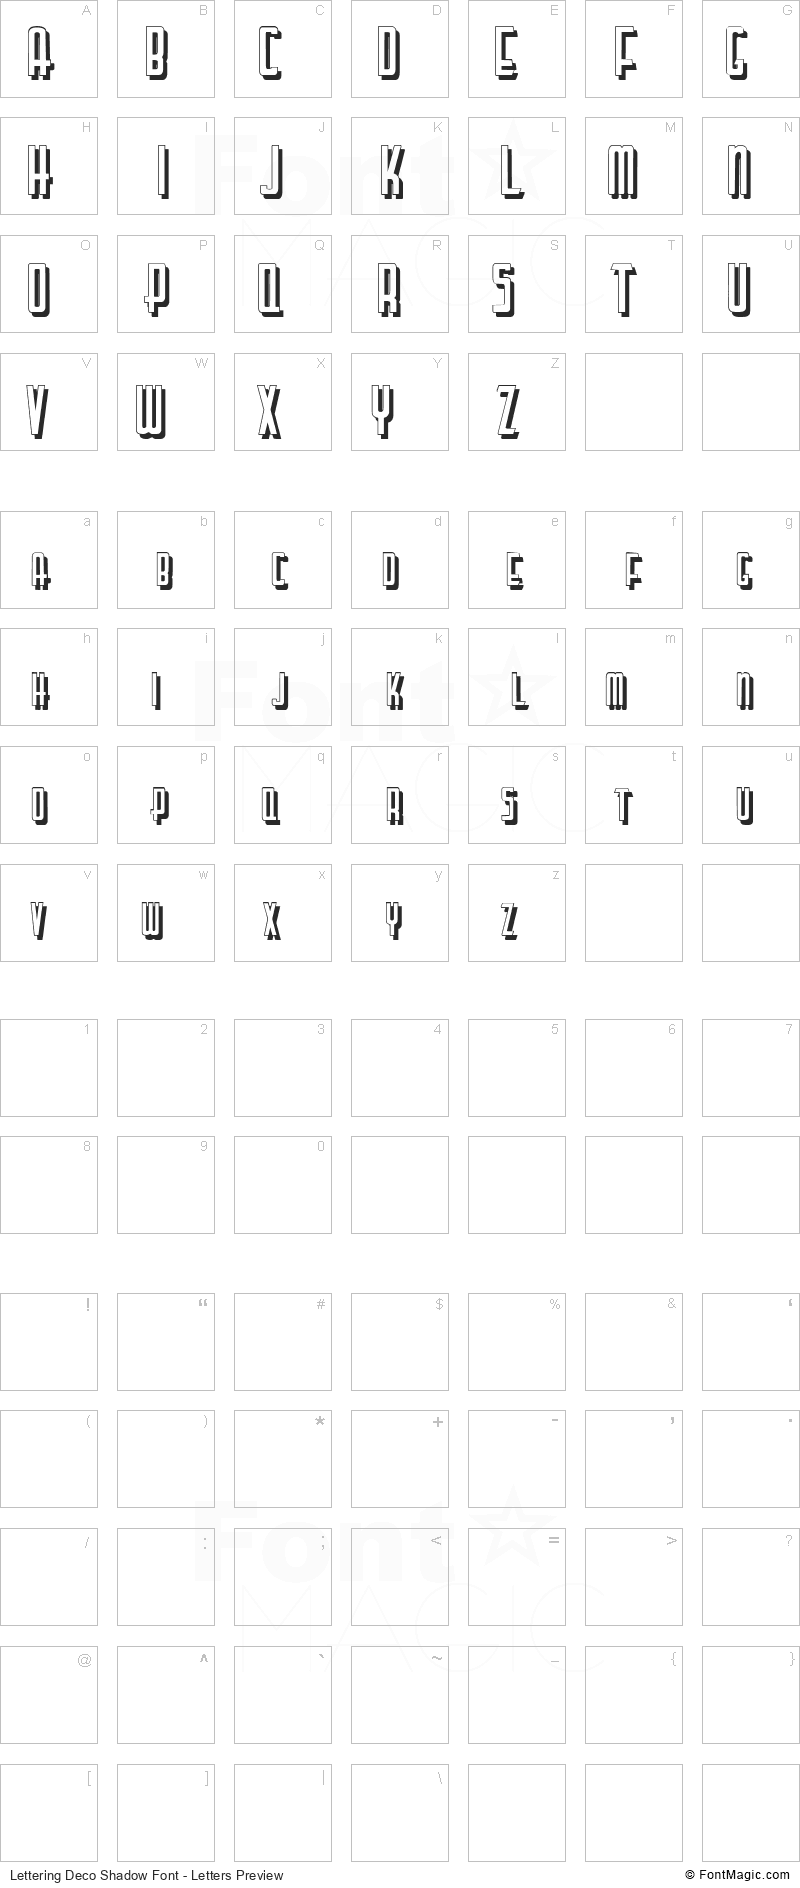 Lettering Deco Shadow Font - All Latters Preview Chart